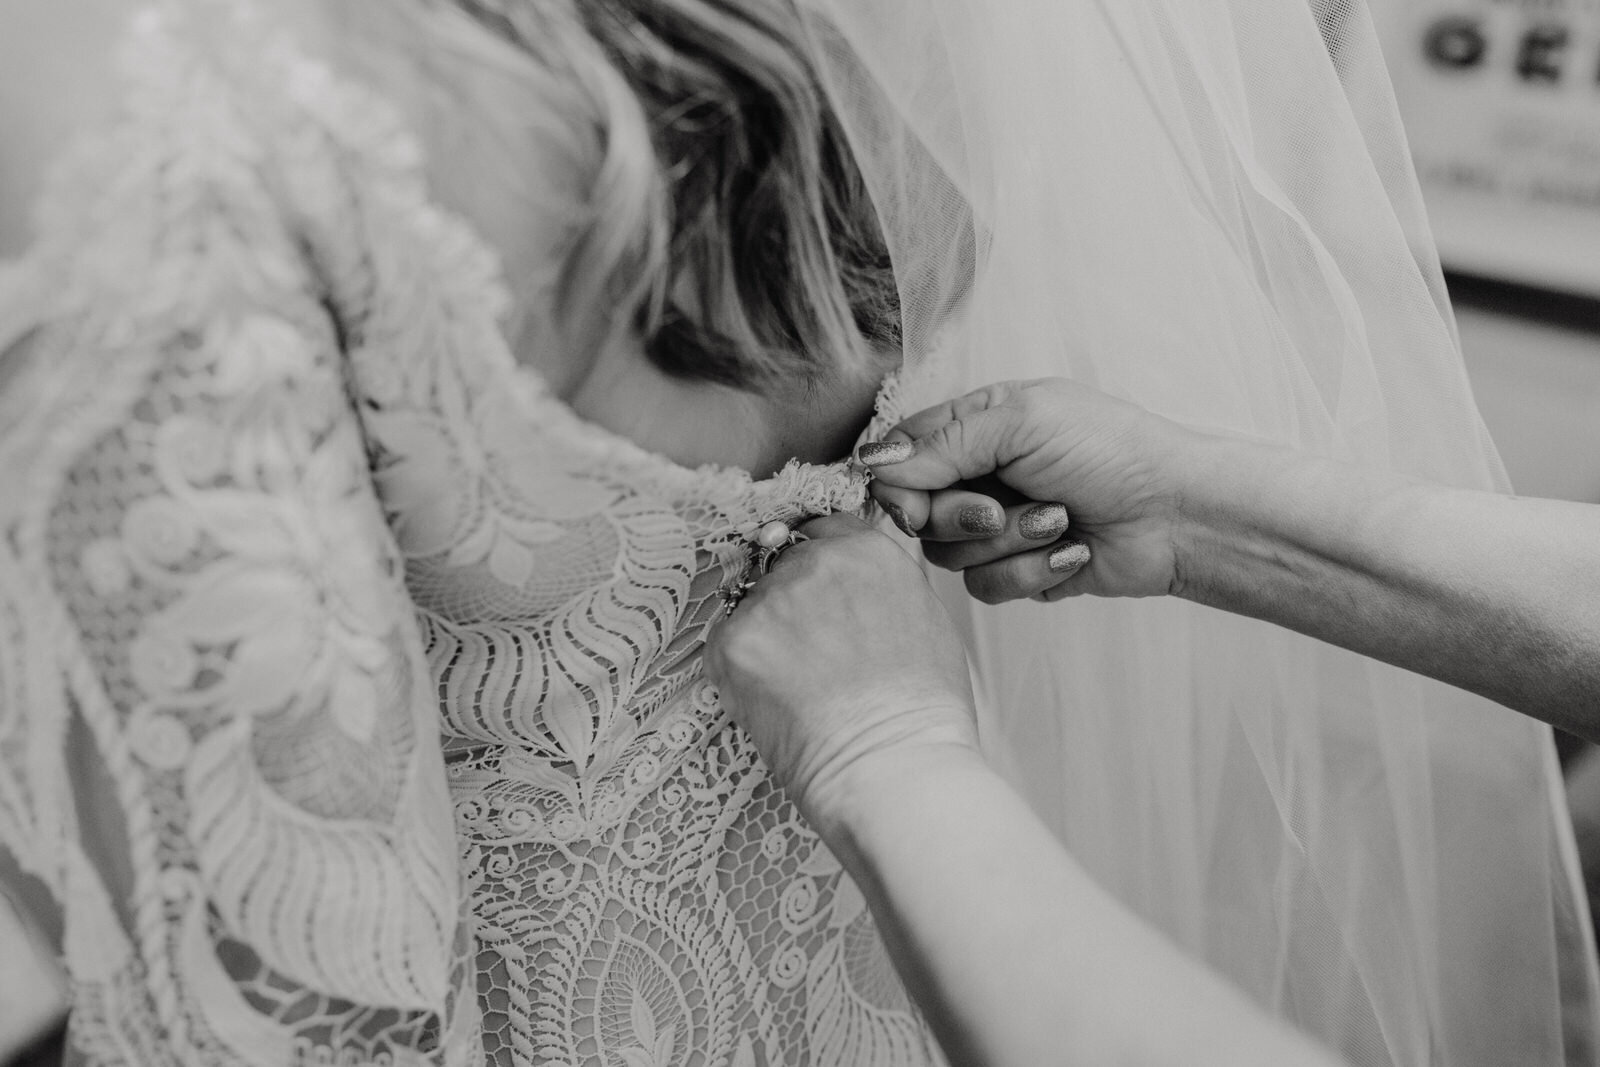 Black and white photo of hands zipping up wedding dress